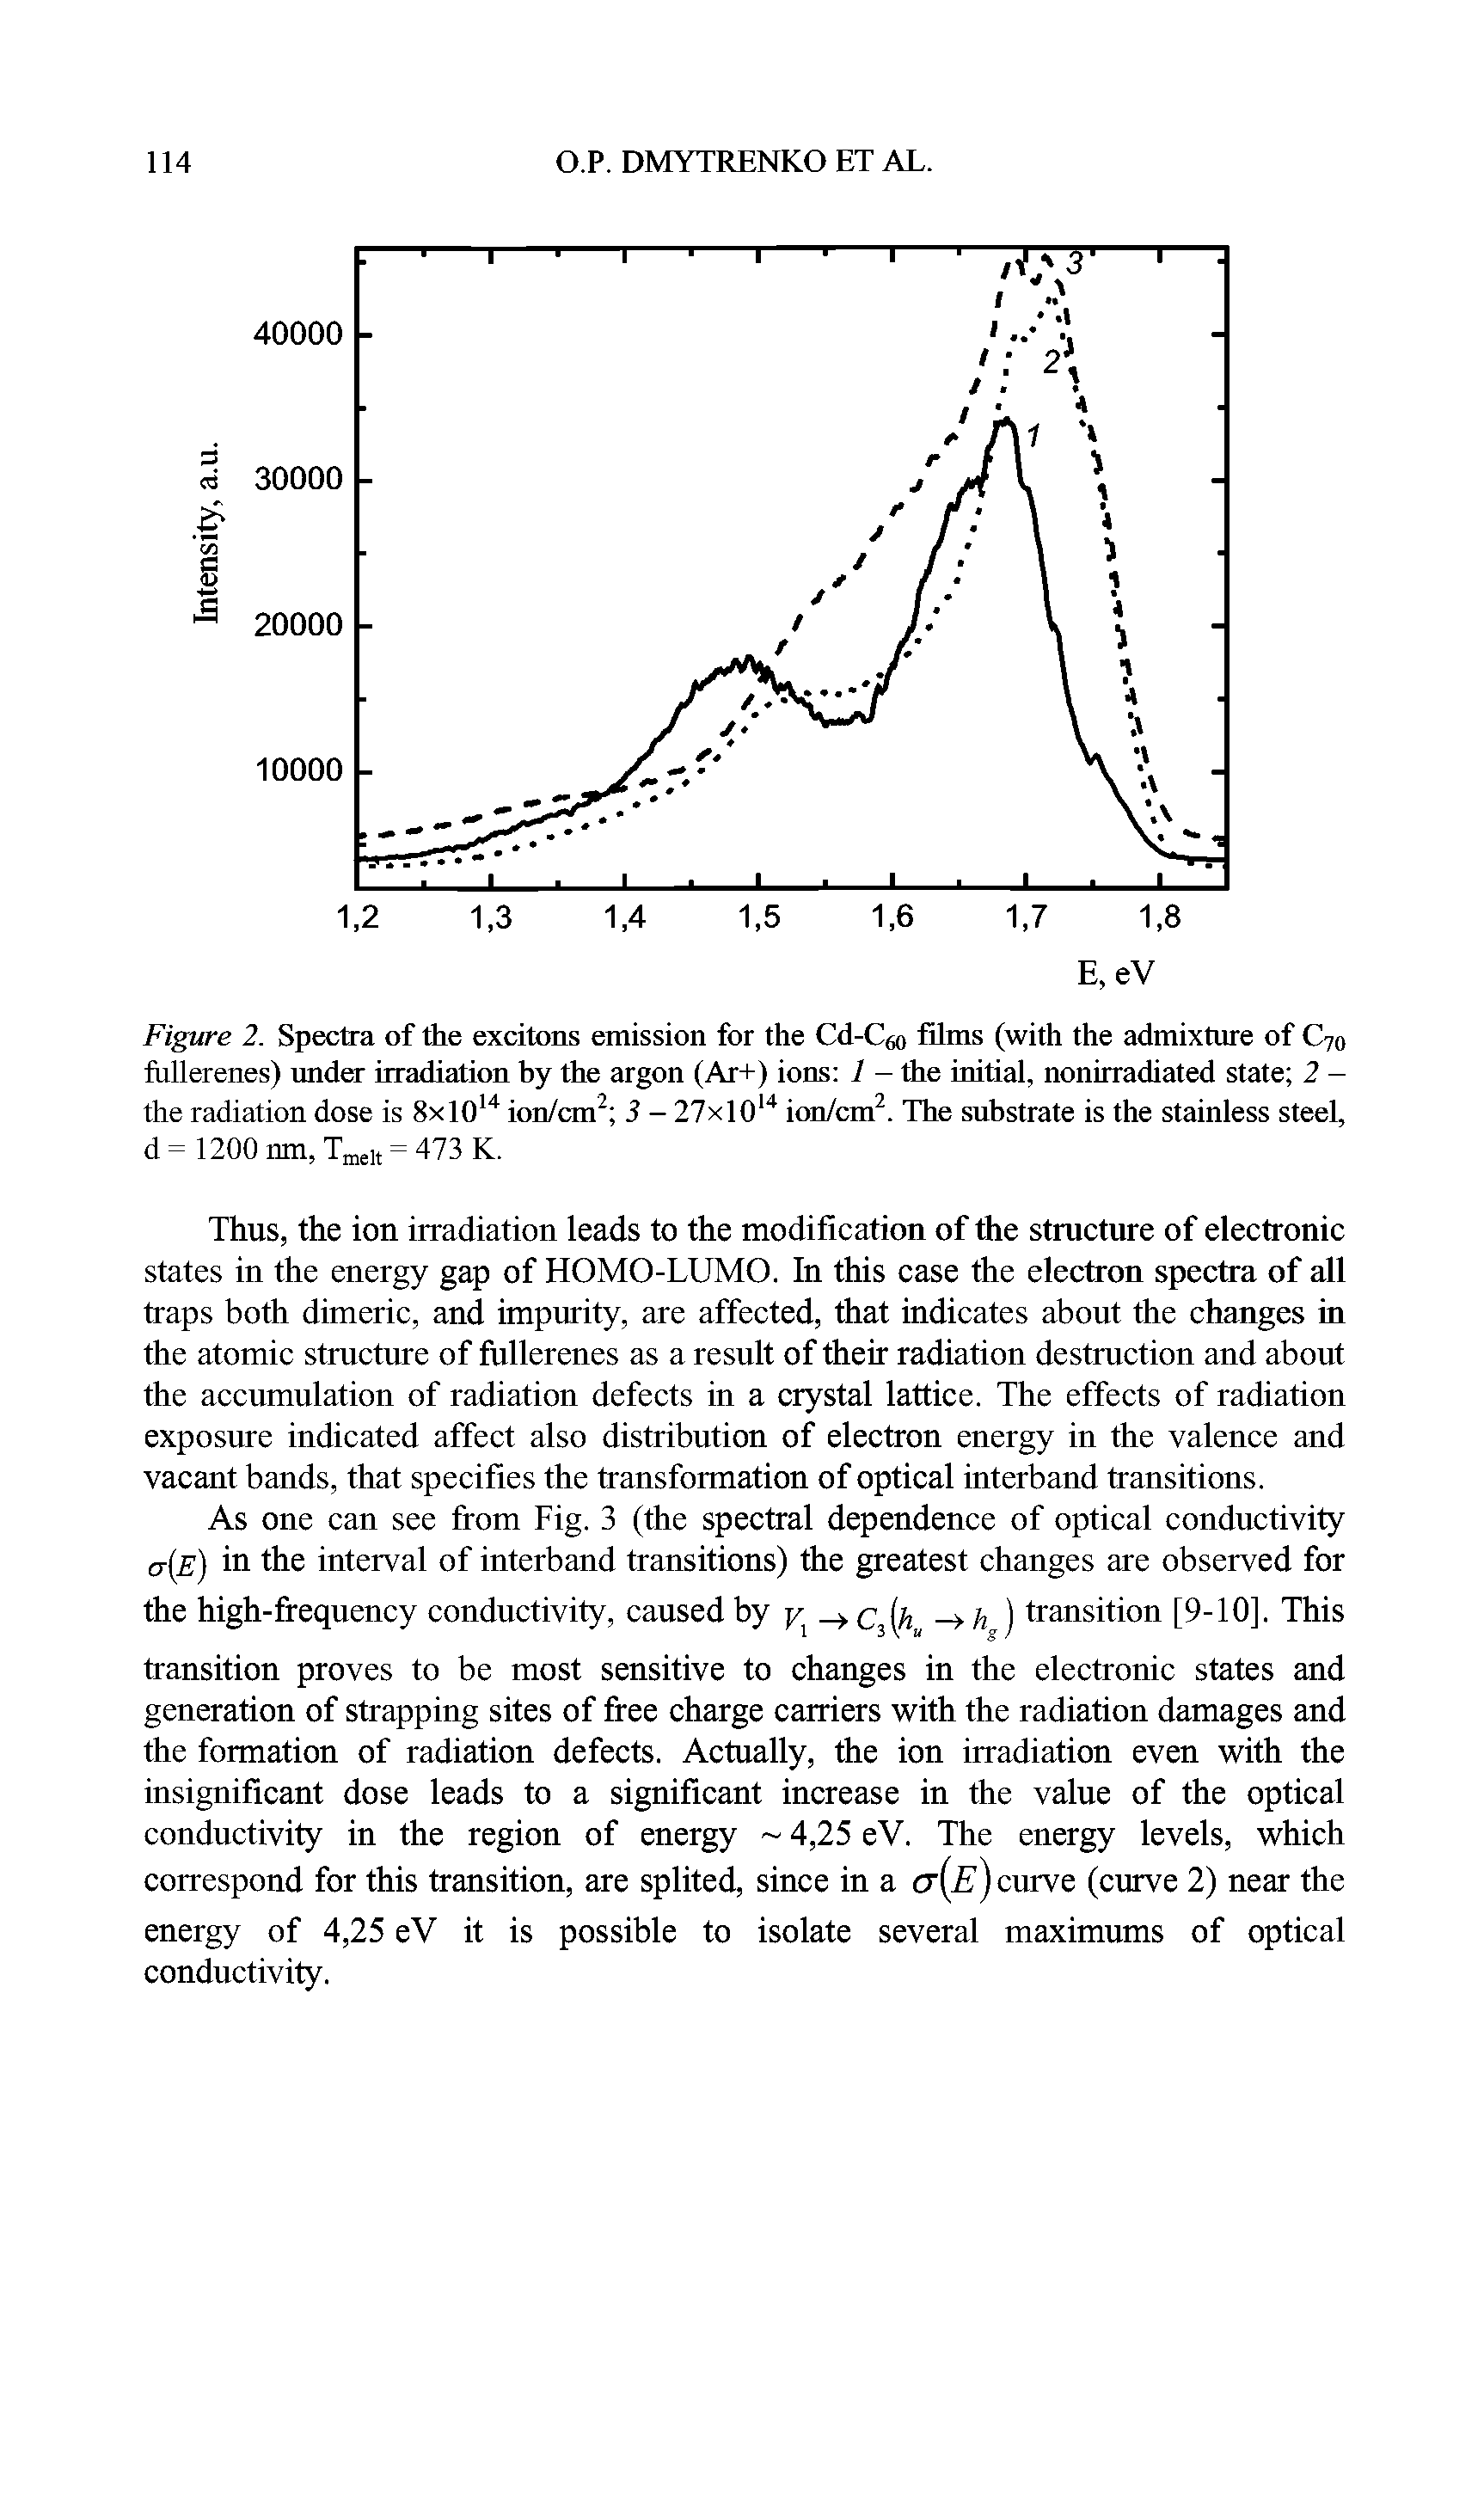 Figure 2. Spectra of the excitons emission for the Cd-C6o films (with the admixture of C70 Mlerenes) under irradiation hy the argon (Ar+) ions 1 - the initial, nonirradiated state 2 -the radiation dose is 8xl014 ion/cm2 3 - 27xl014 ion/cm2. The substrate is the stainless steel, d= 1200 nm, Tmelt = 473 K.